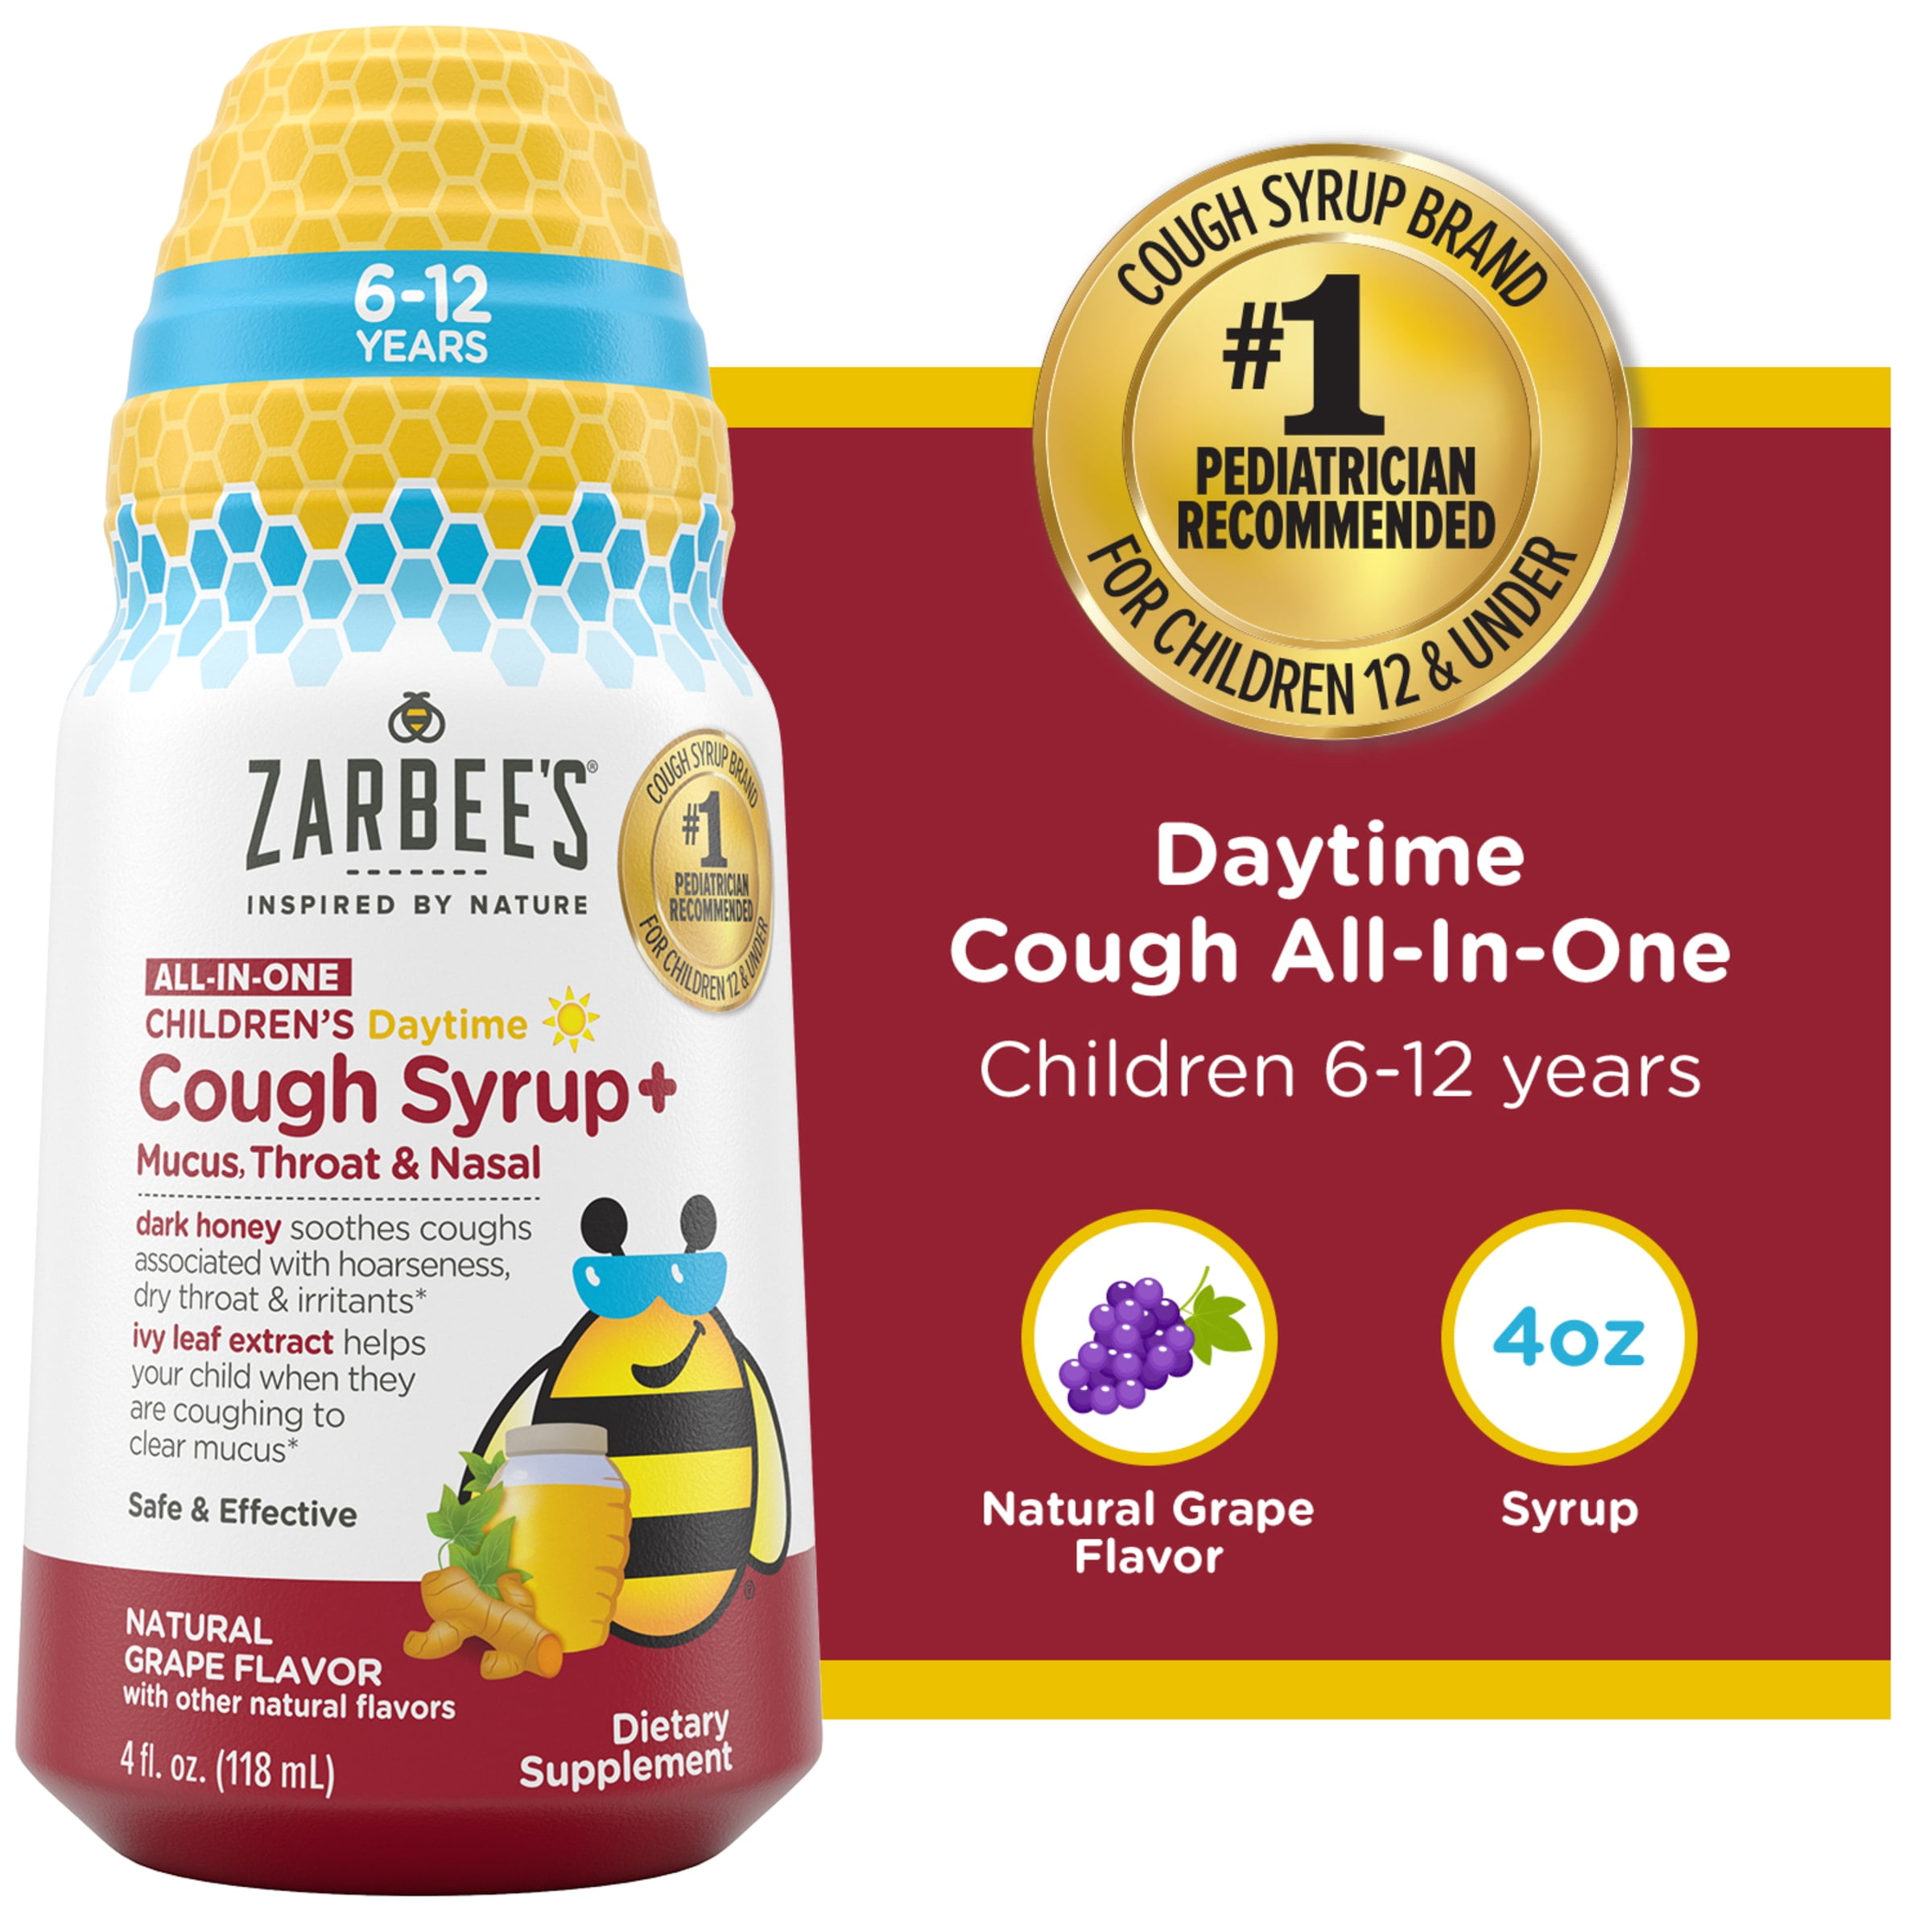 Zarbee's Kids All-in-One Daytime Cough, Age 6-12, Honey, Turmeric